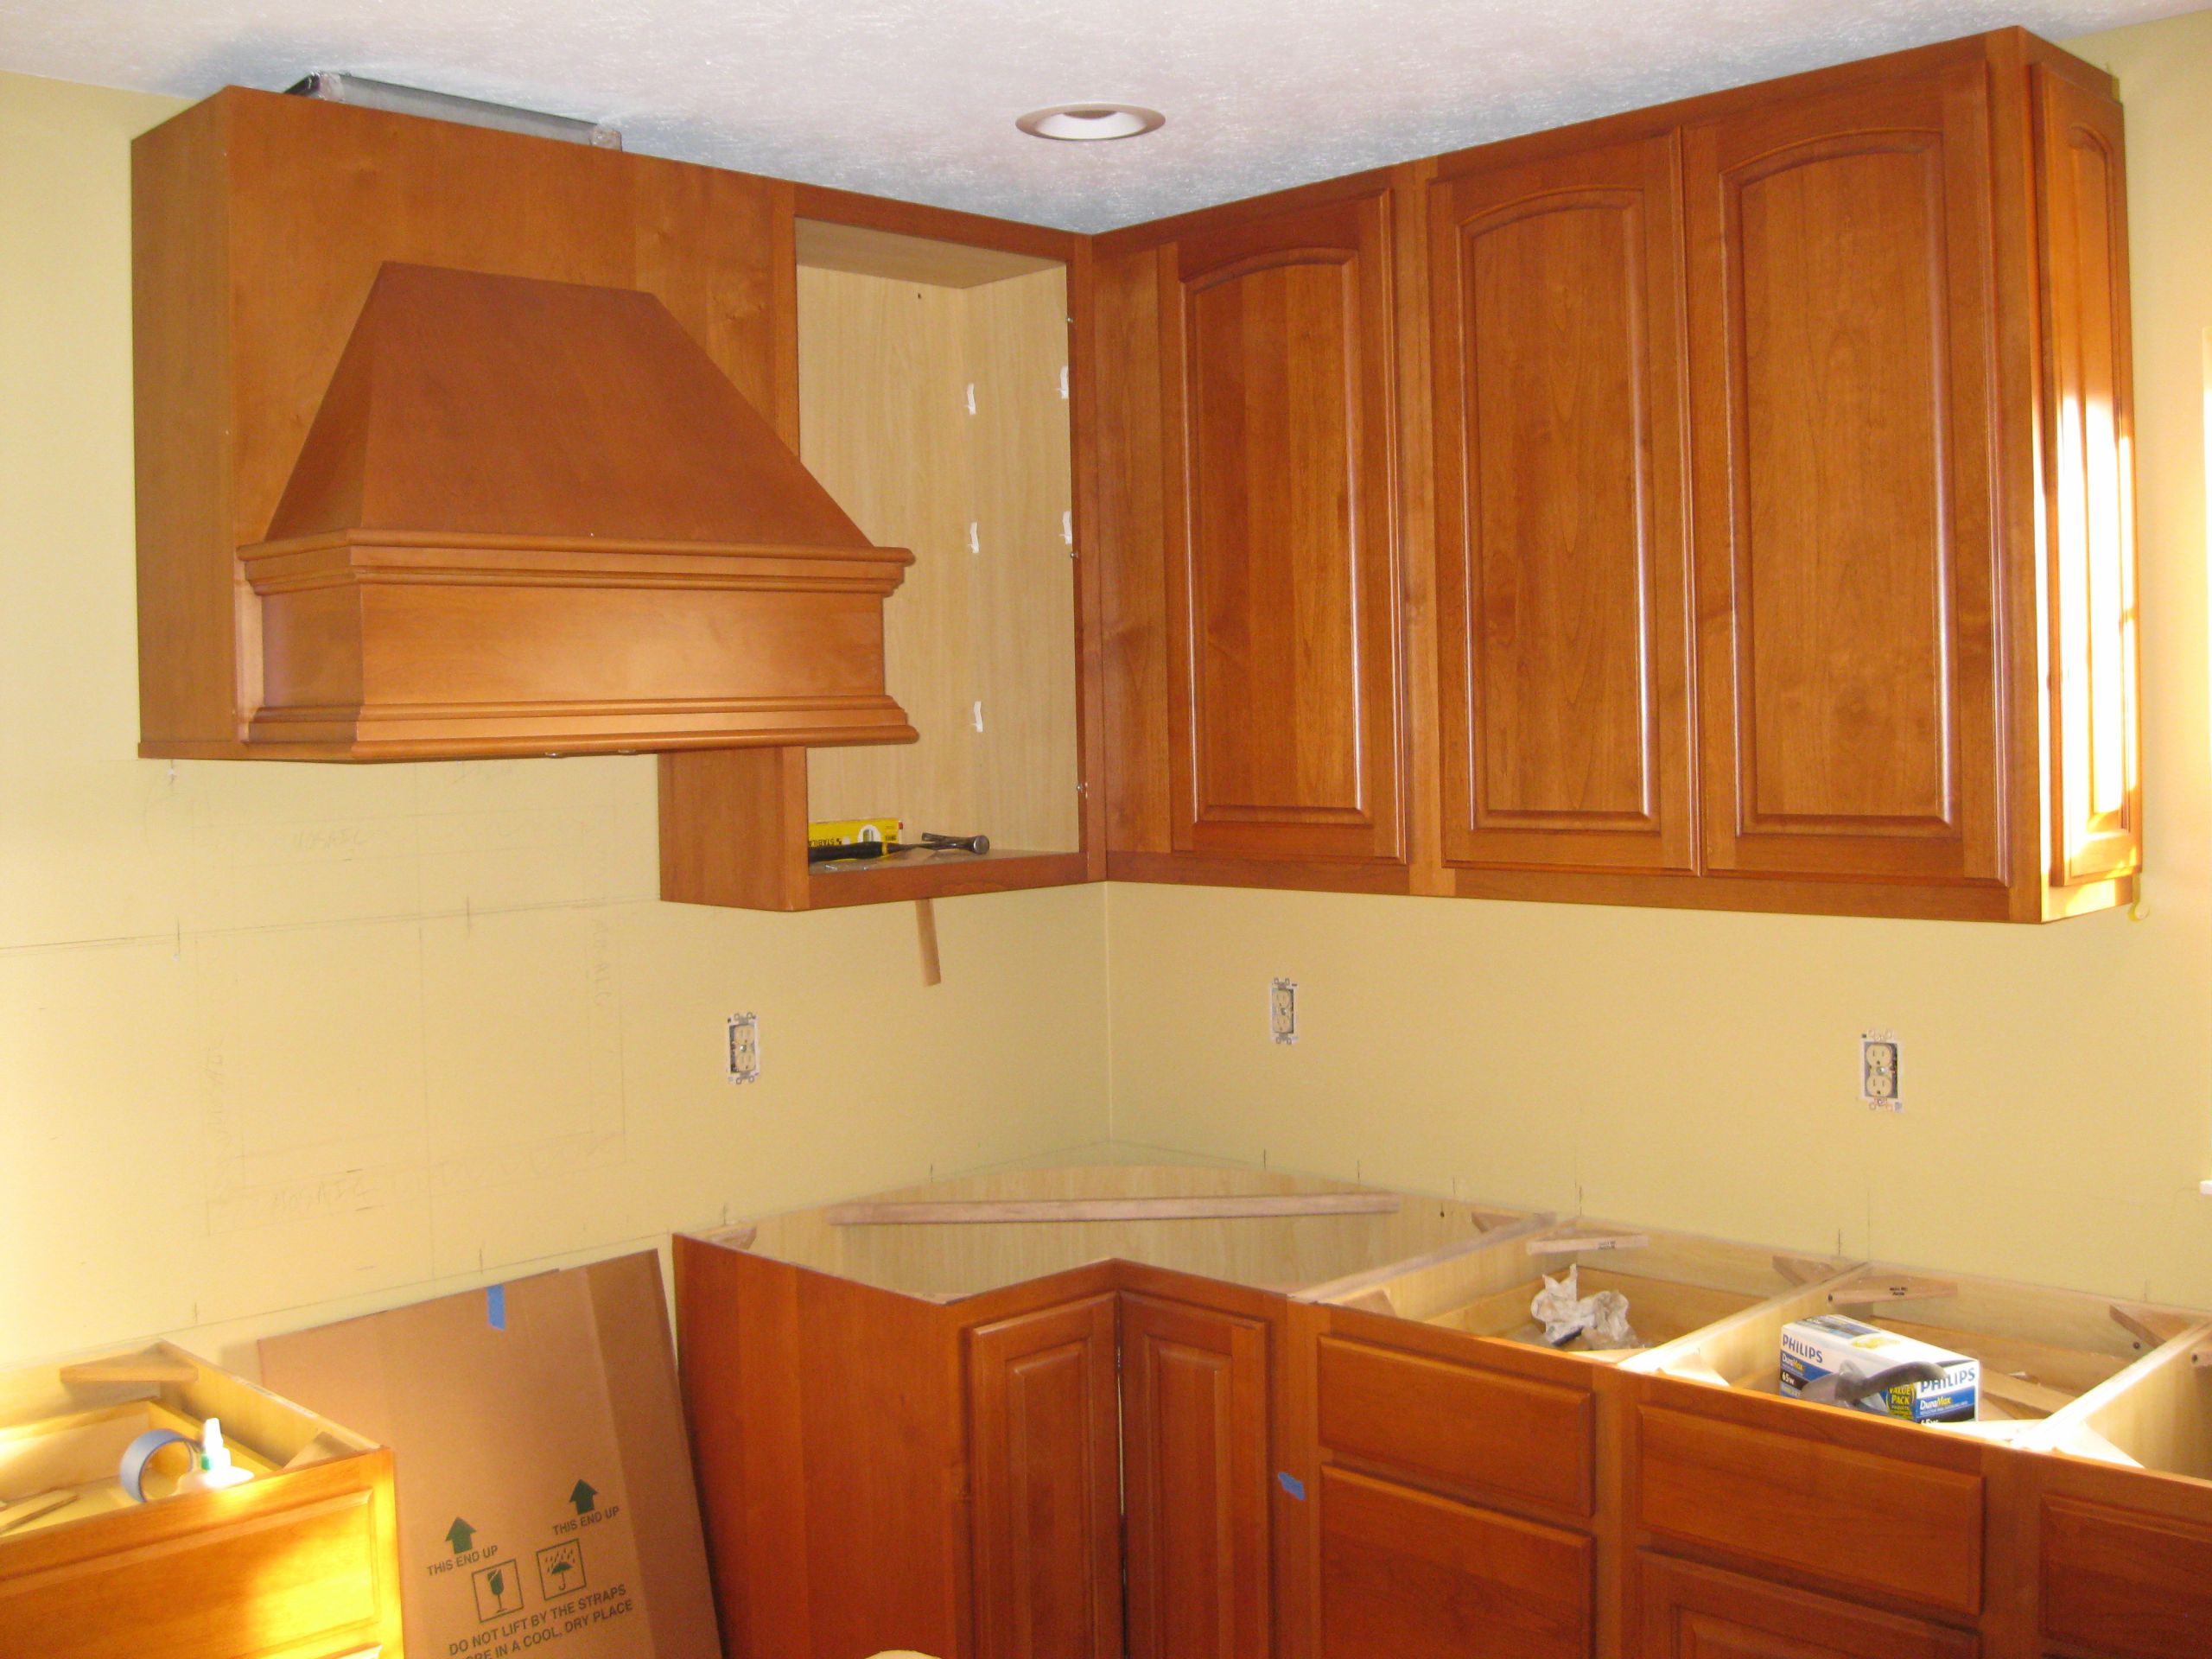 Kitchen Cabinet Walls
 West Chester Kitchen fice Wall Cabinets Remodeling